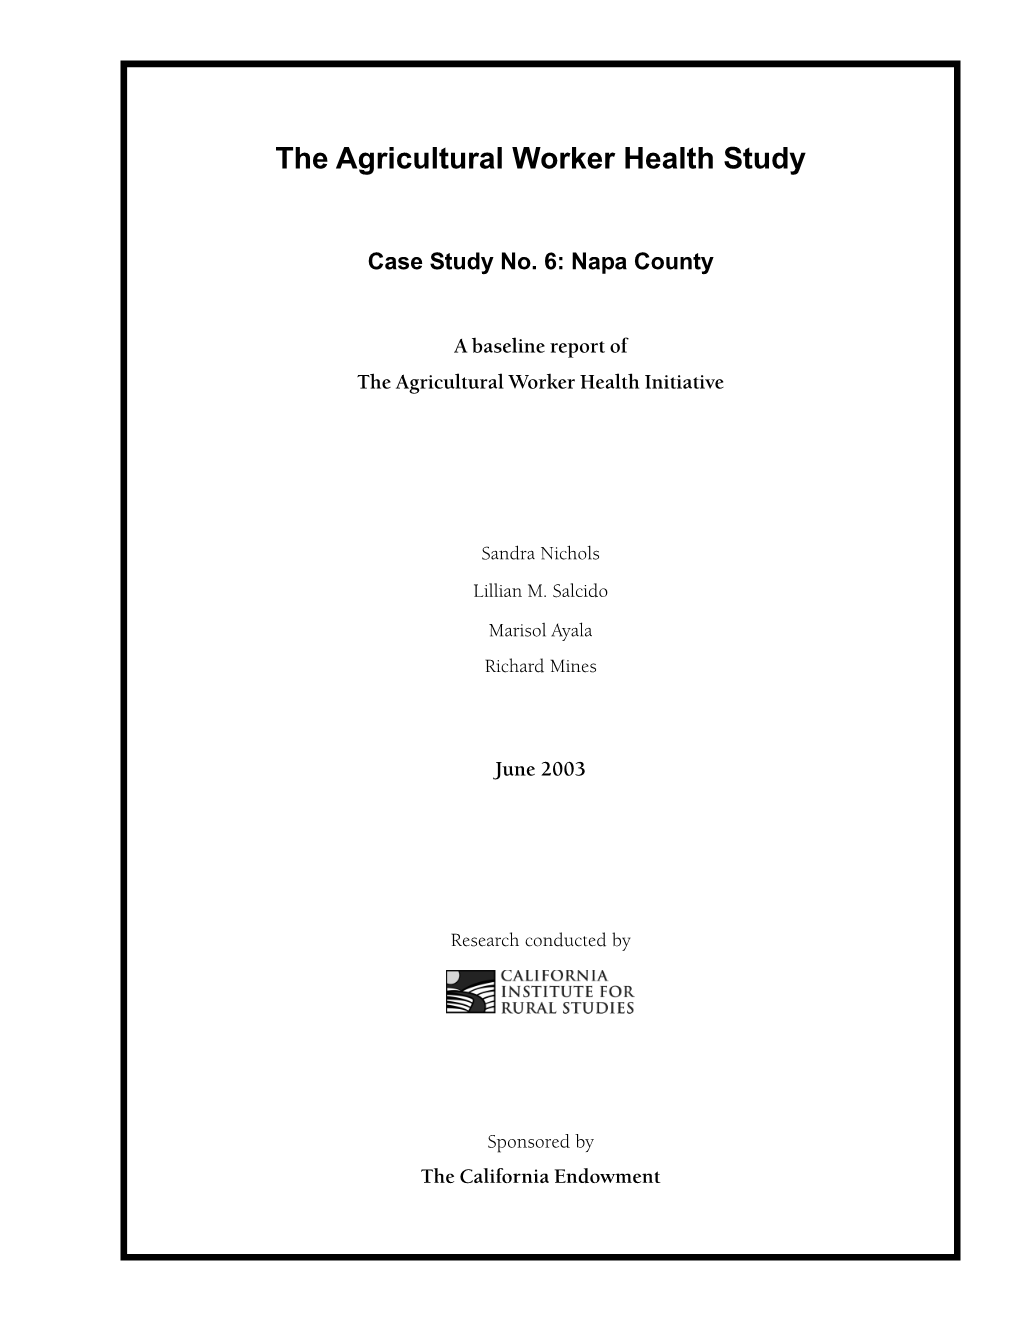 The Agricultural Worker Health Study